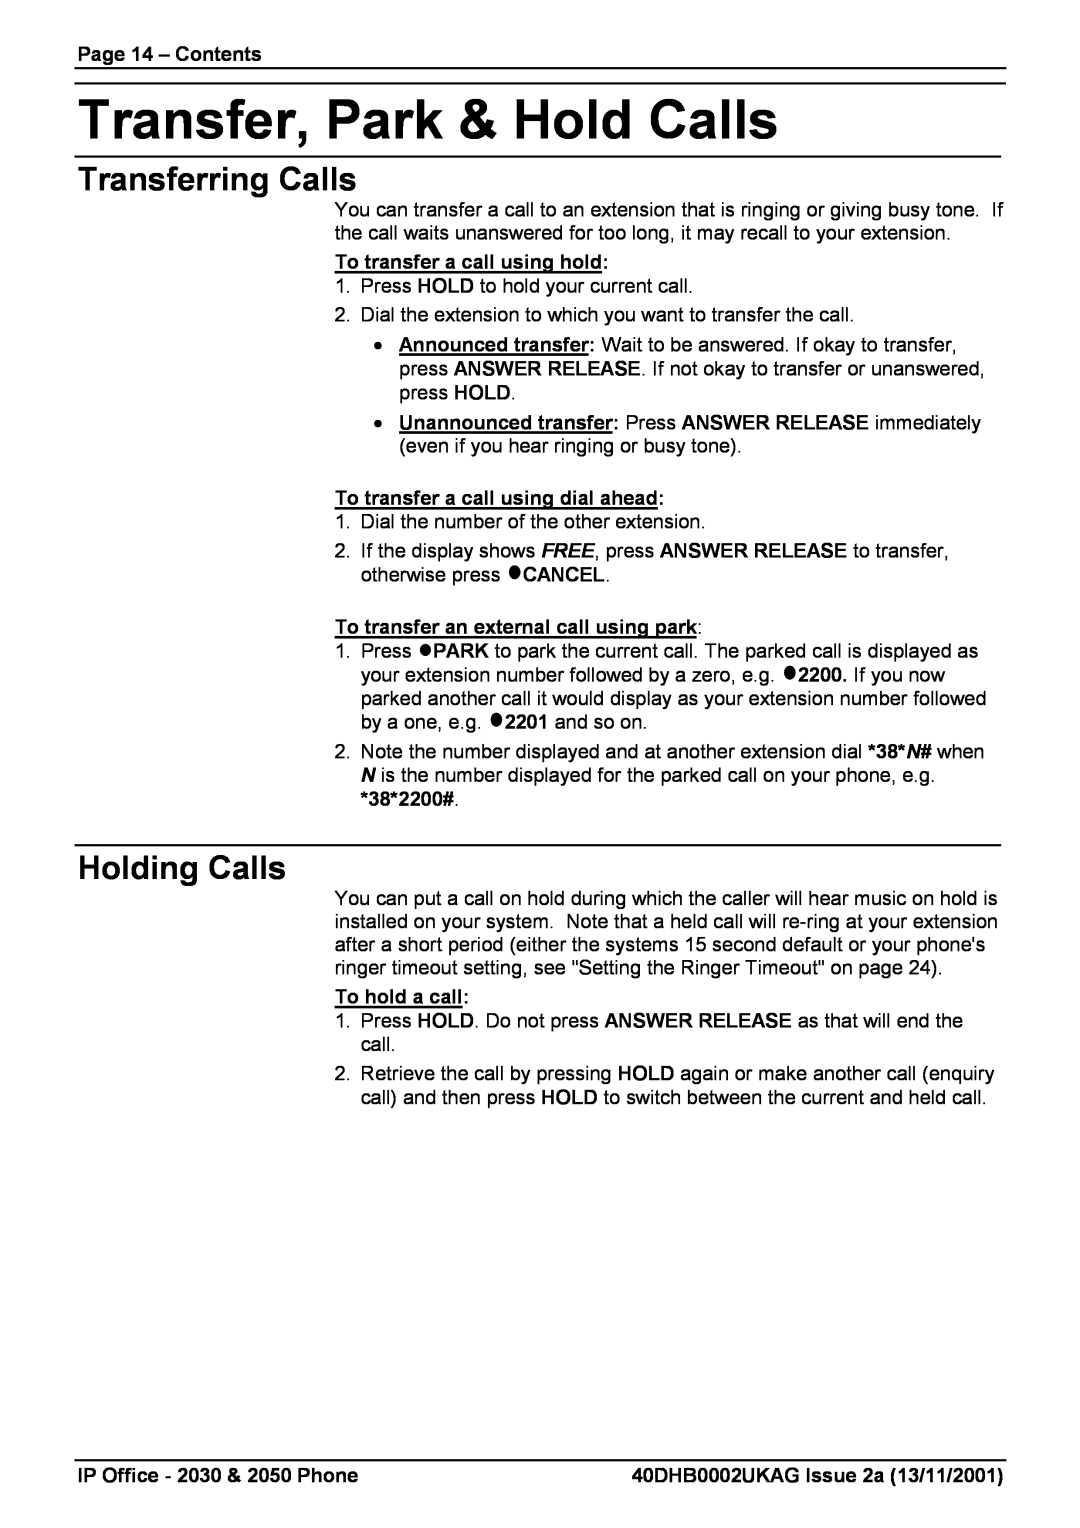 Avaya 2050, 2030 manual Transfer, Park & Hold Calls, Transferring Calls, Holding Calls, Page 14 - Contents, To hold a call 